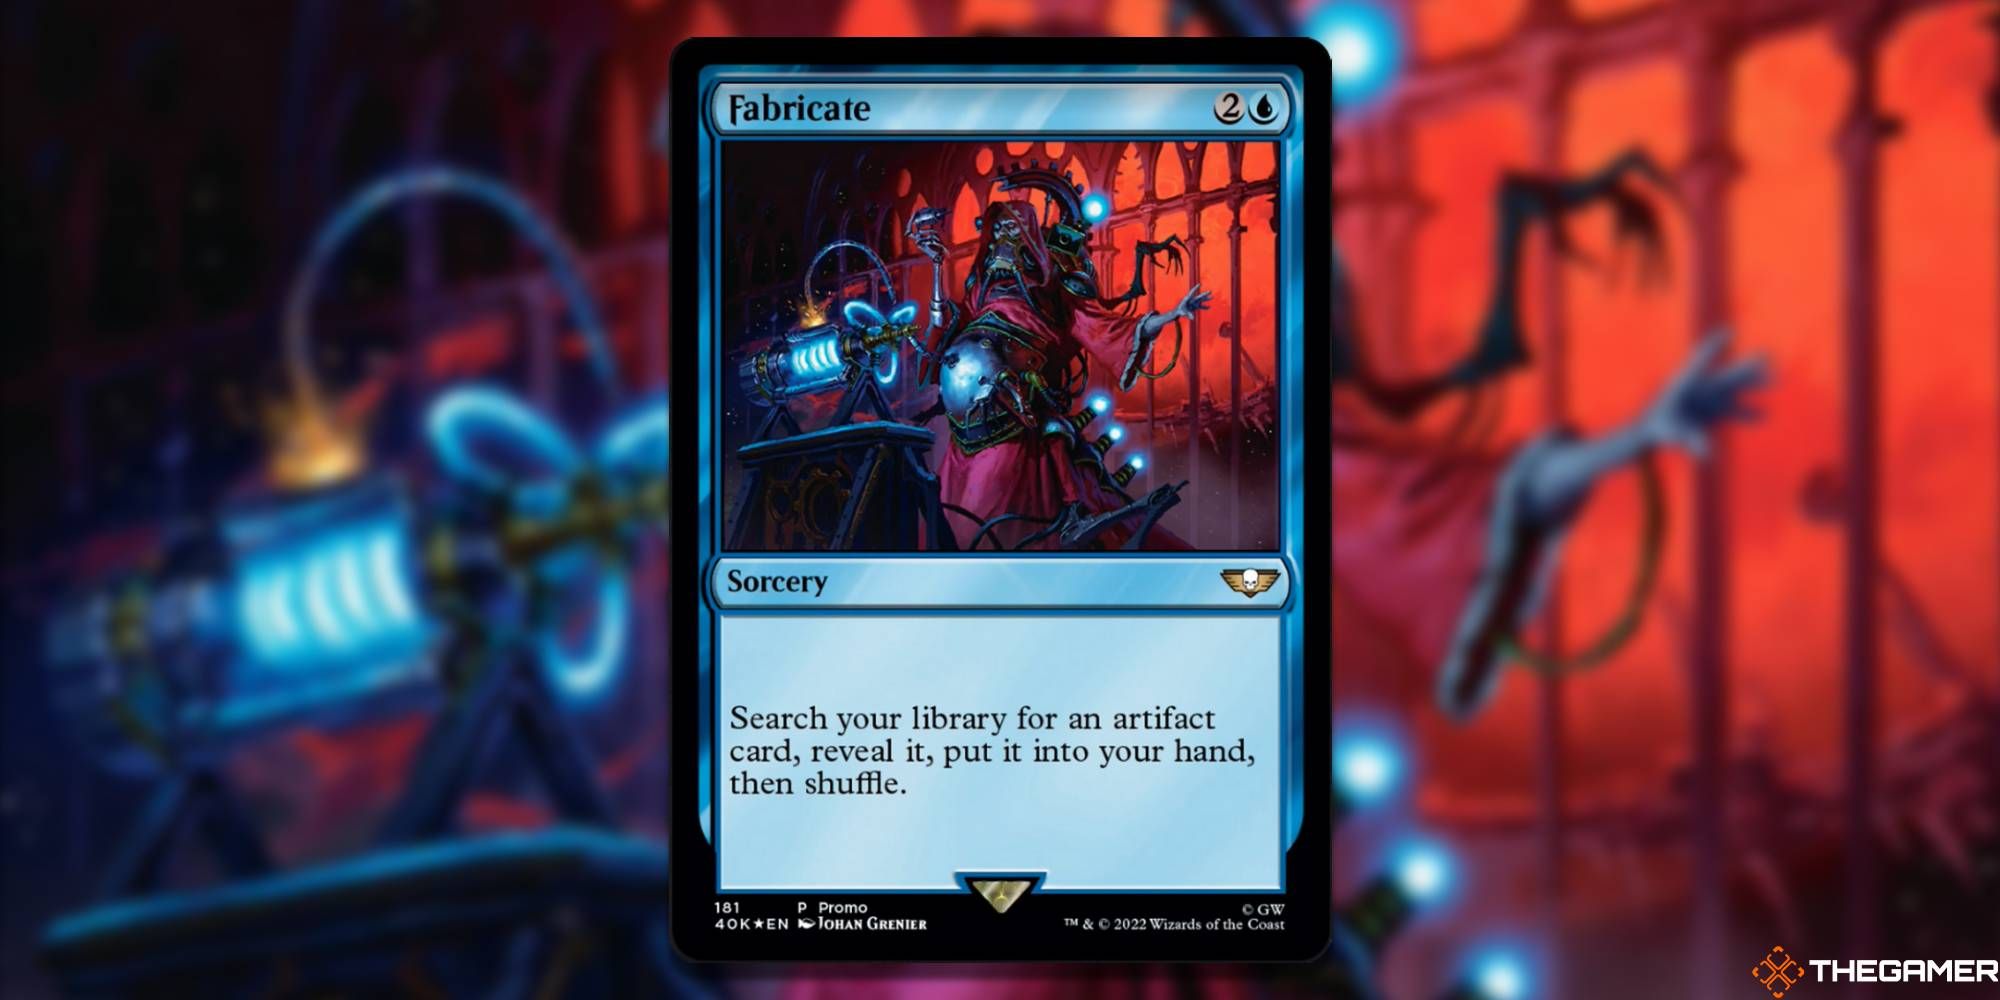 Image of the Fabricate card in Magic: The Gathering, with art by Warren Mahy